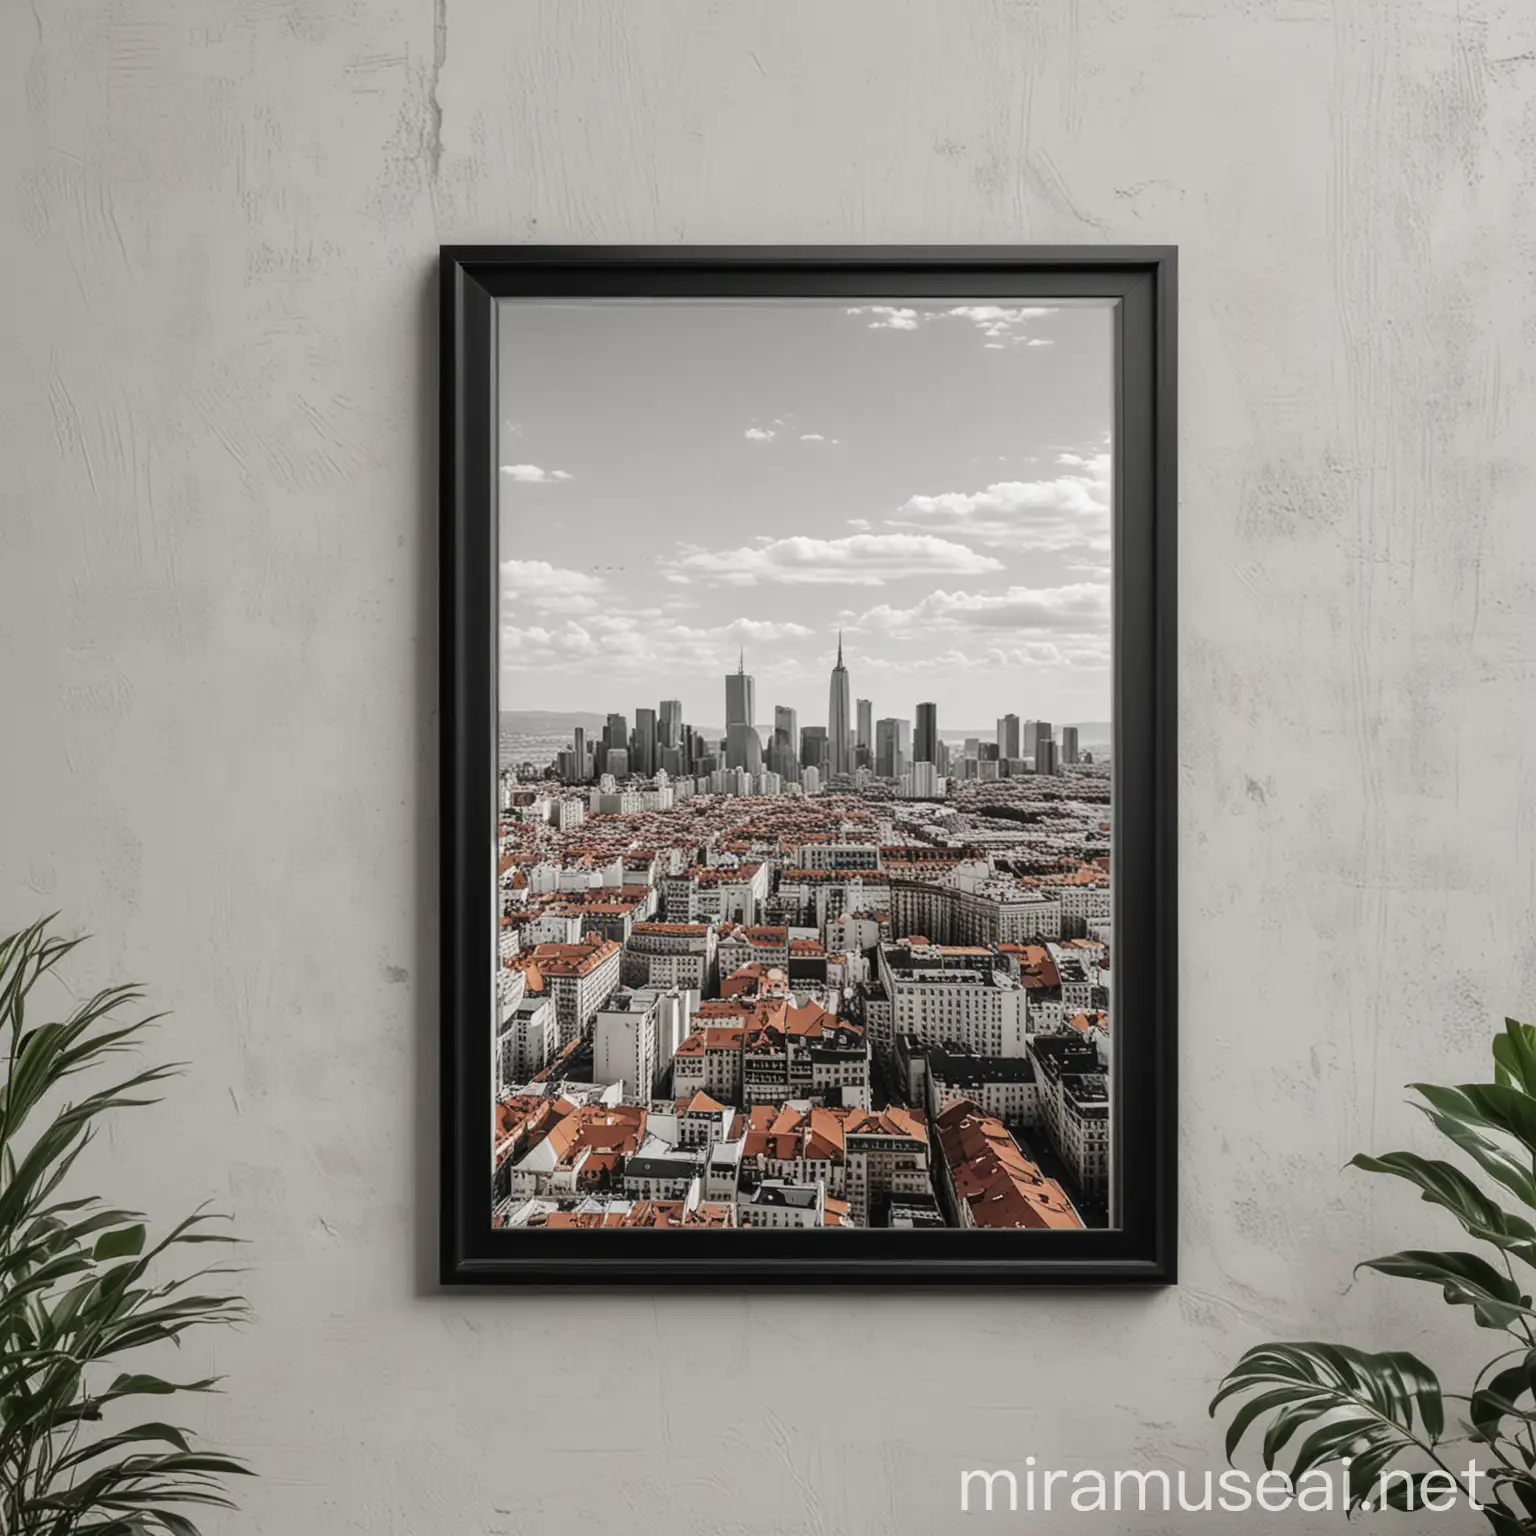 A4 black frame mockup on a wall with a city view from a window